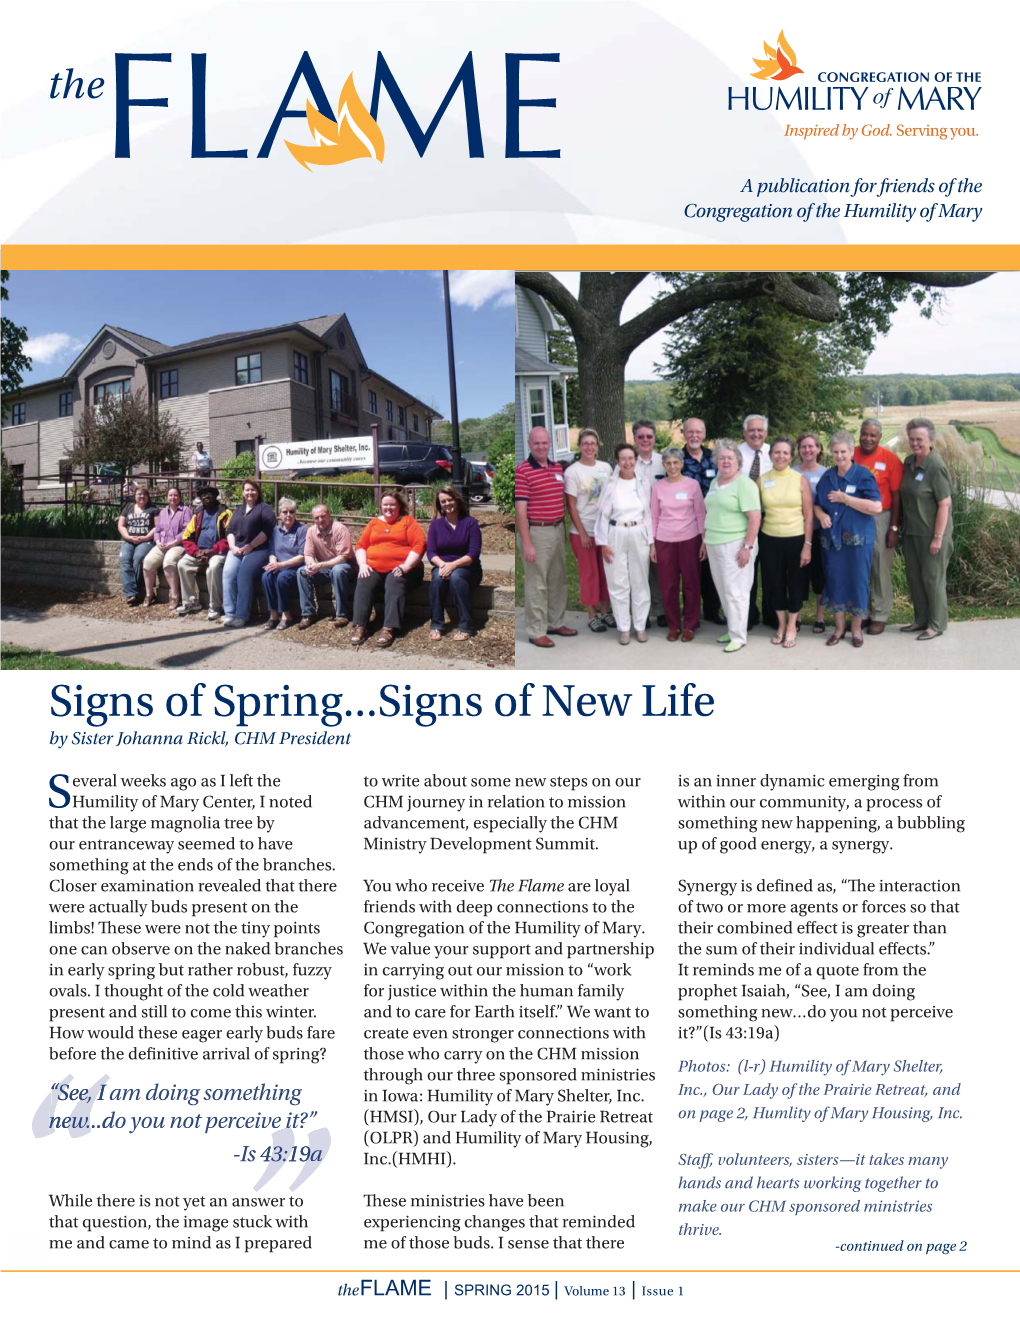 Signs of Spring...Signs of New Life by Sister Johanna Rickl, CHM President